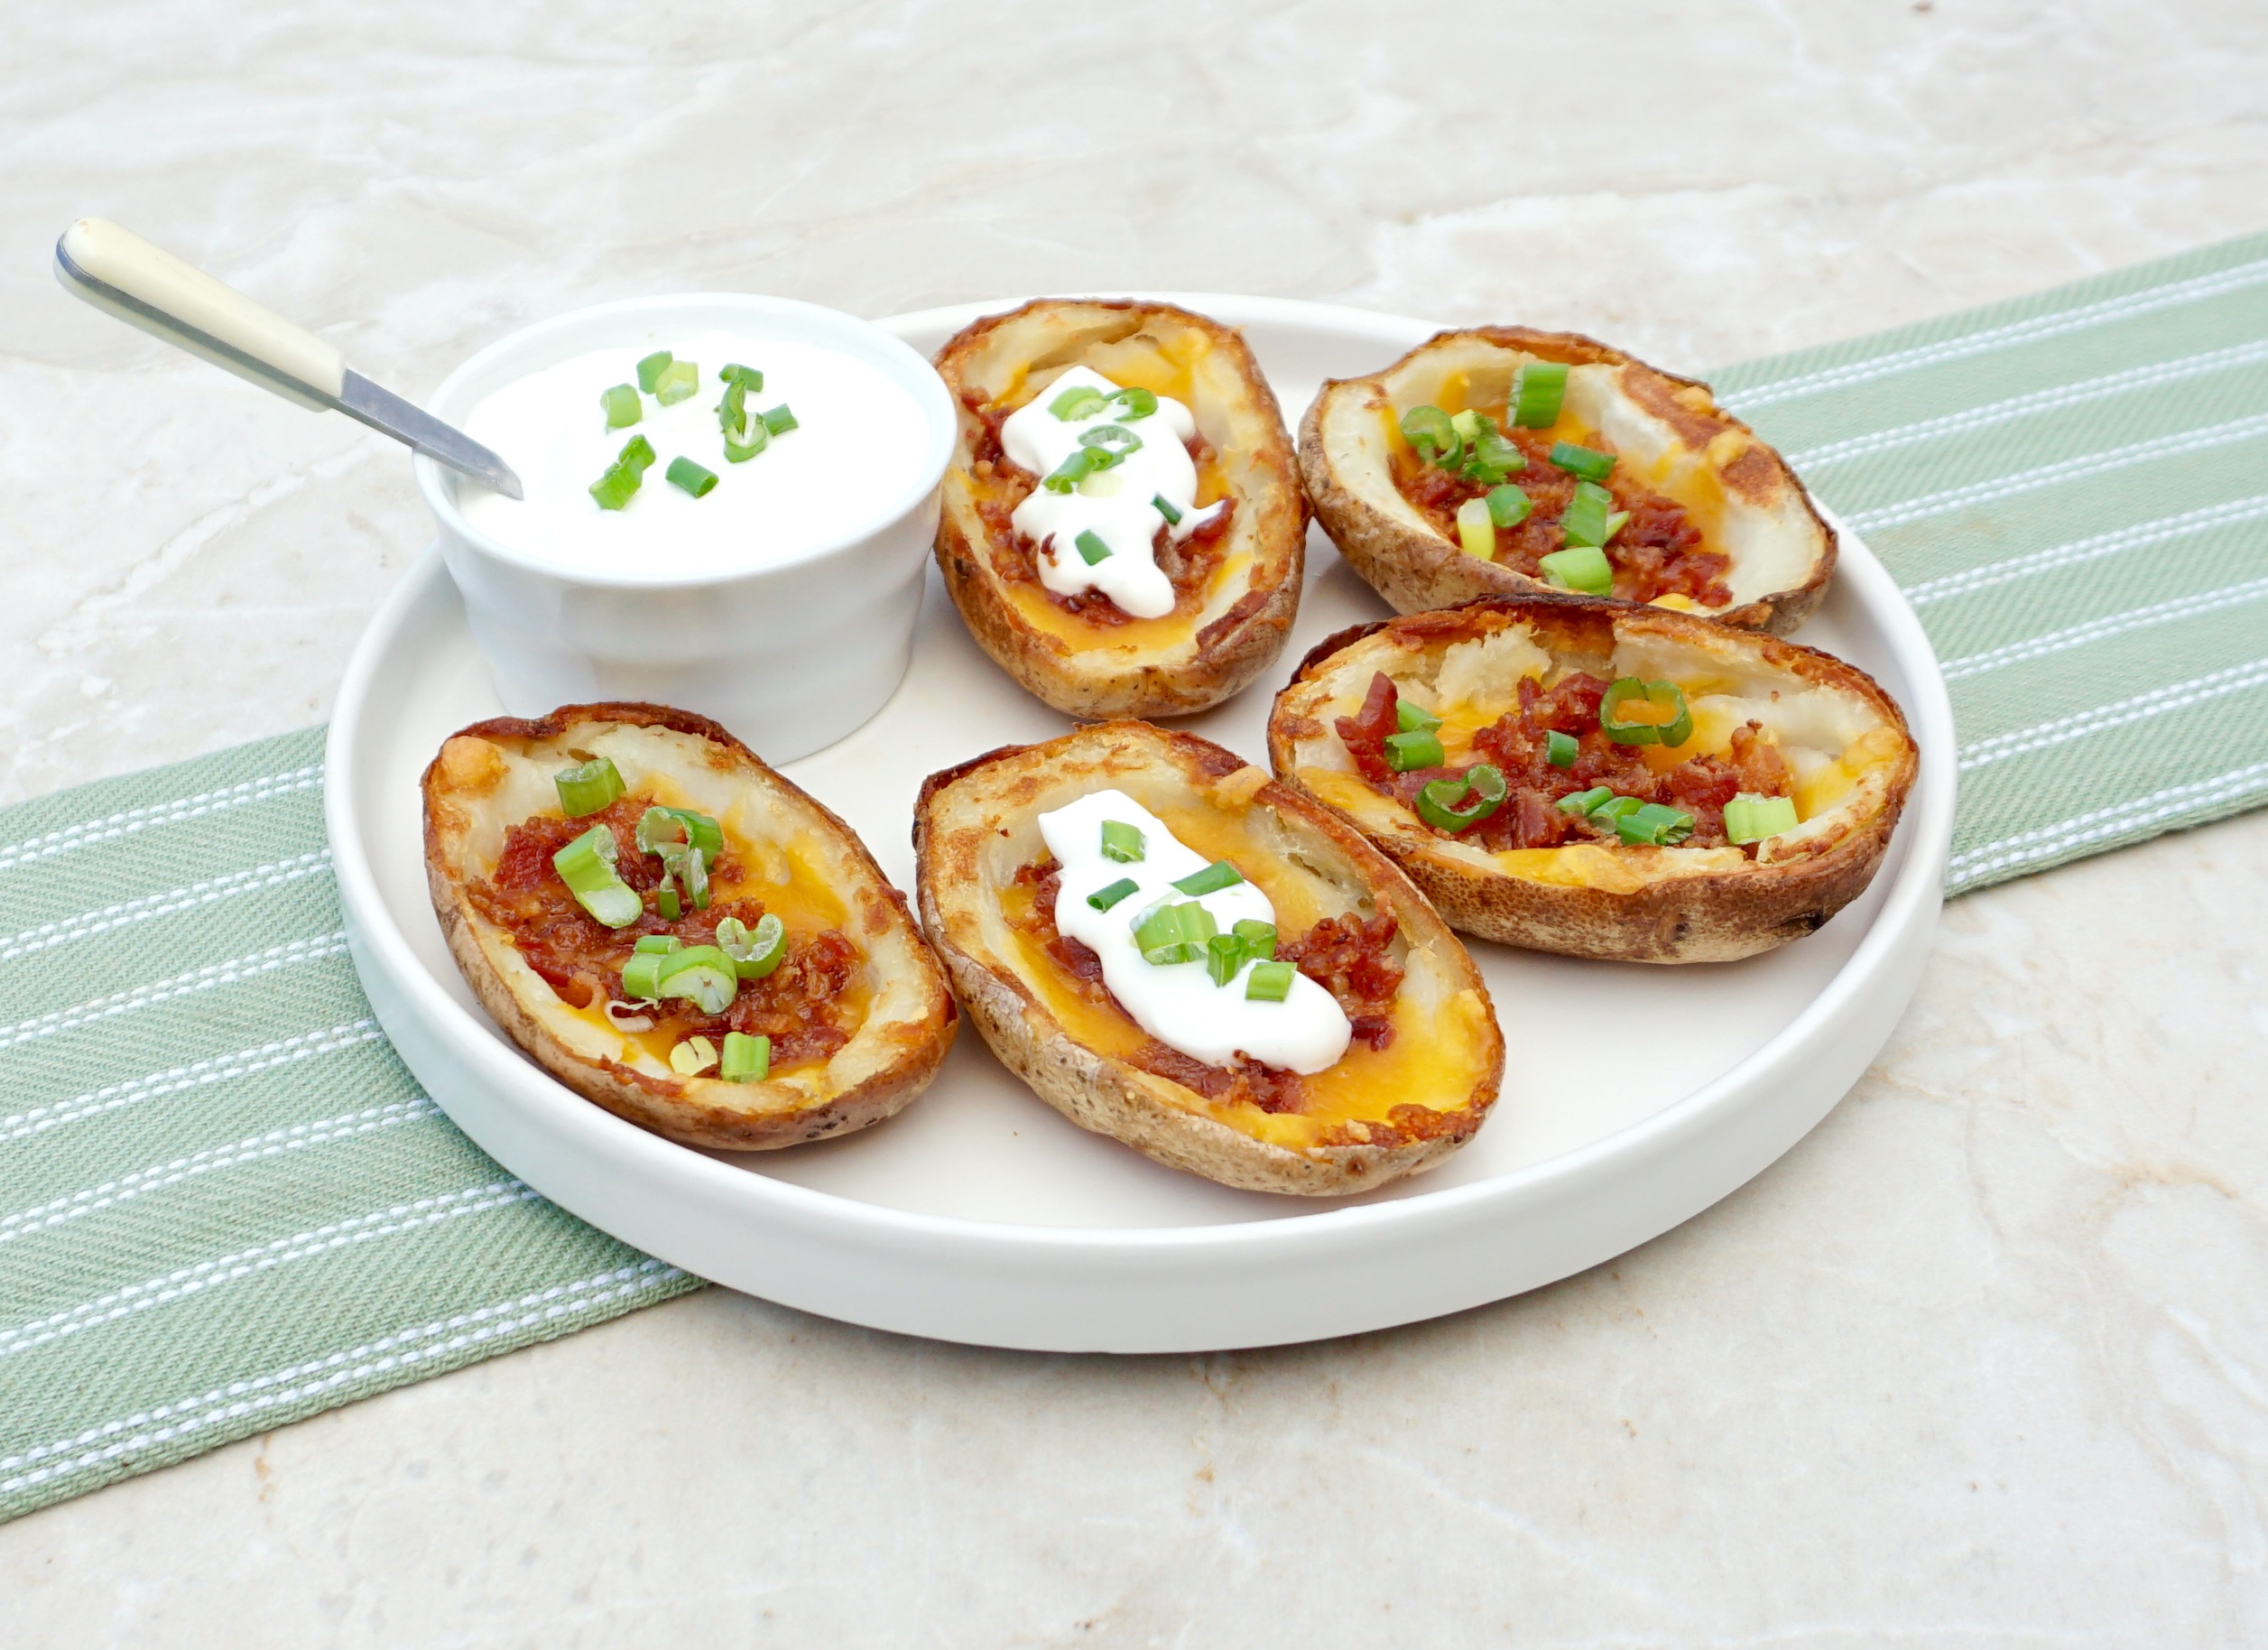 Oven Baked Potato Skins are crispy, cheesy and delicious.